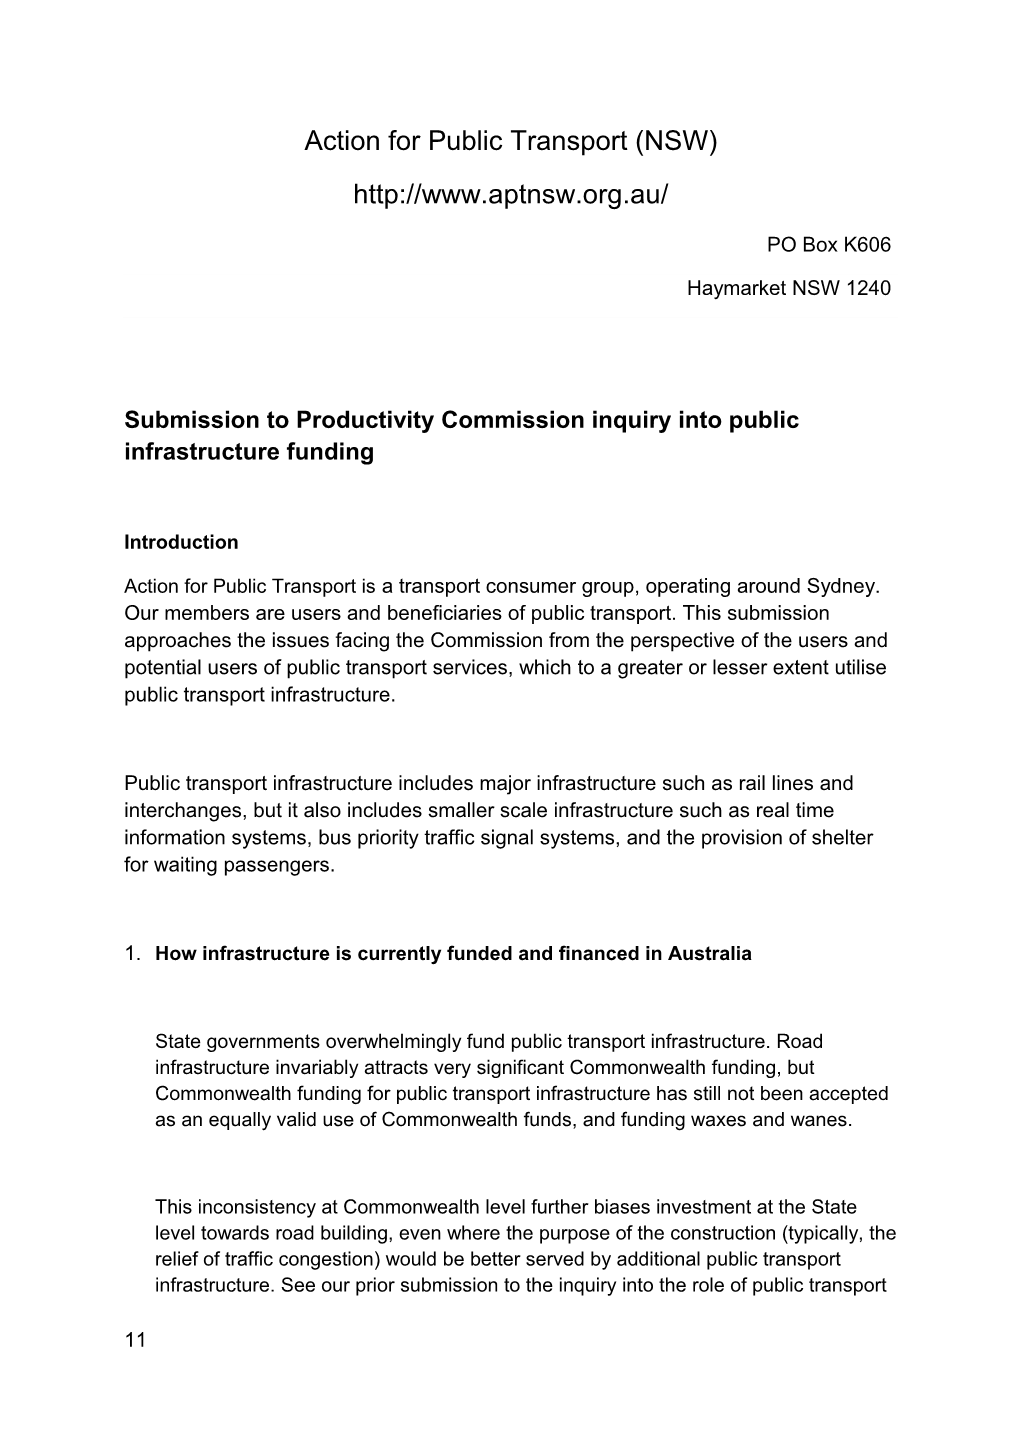 Submission DR152 - Action for Public Transport NSW - Public Infrastructure - Public Inquiry